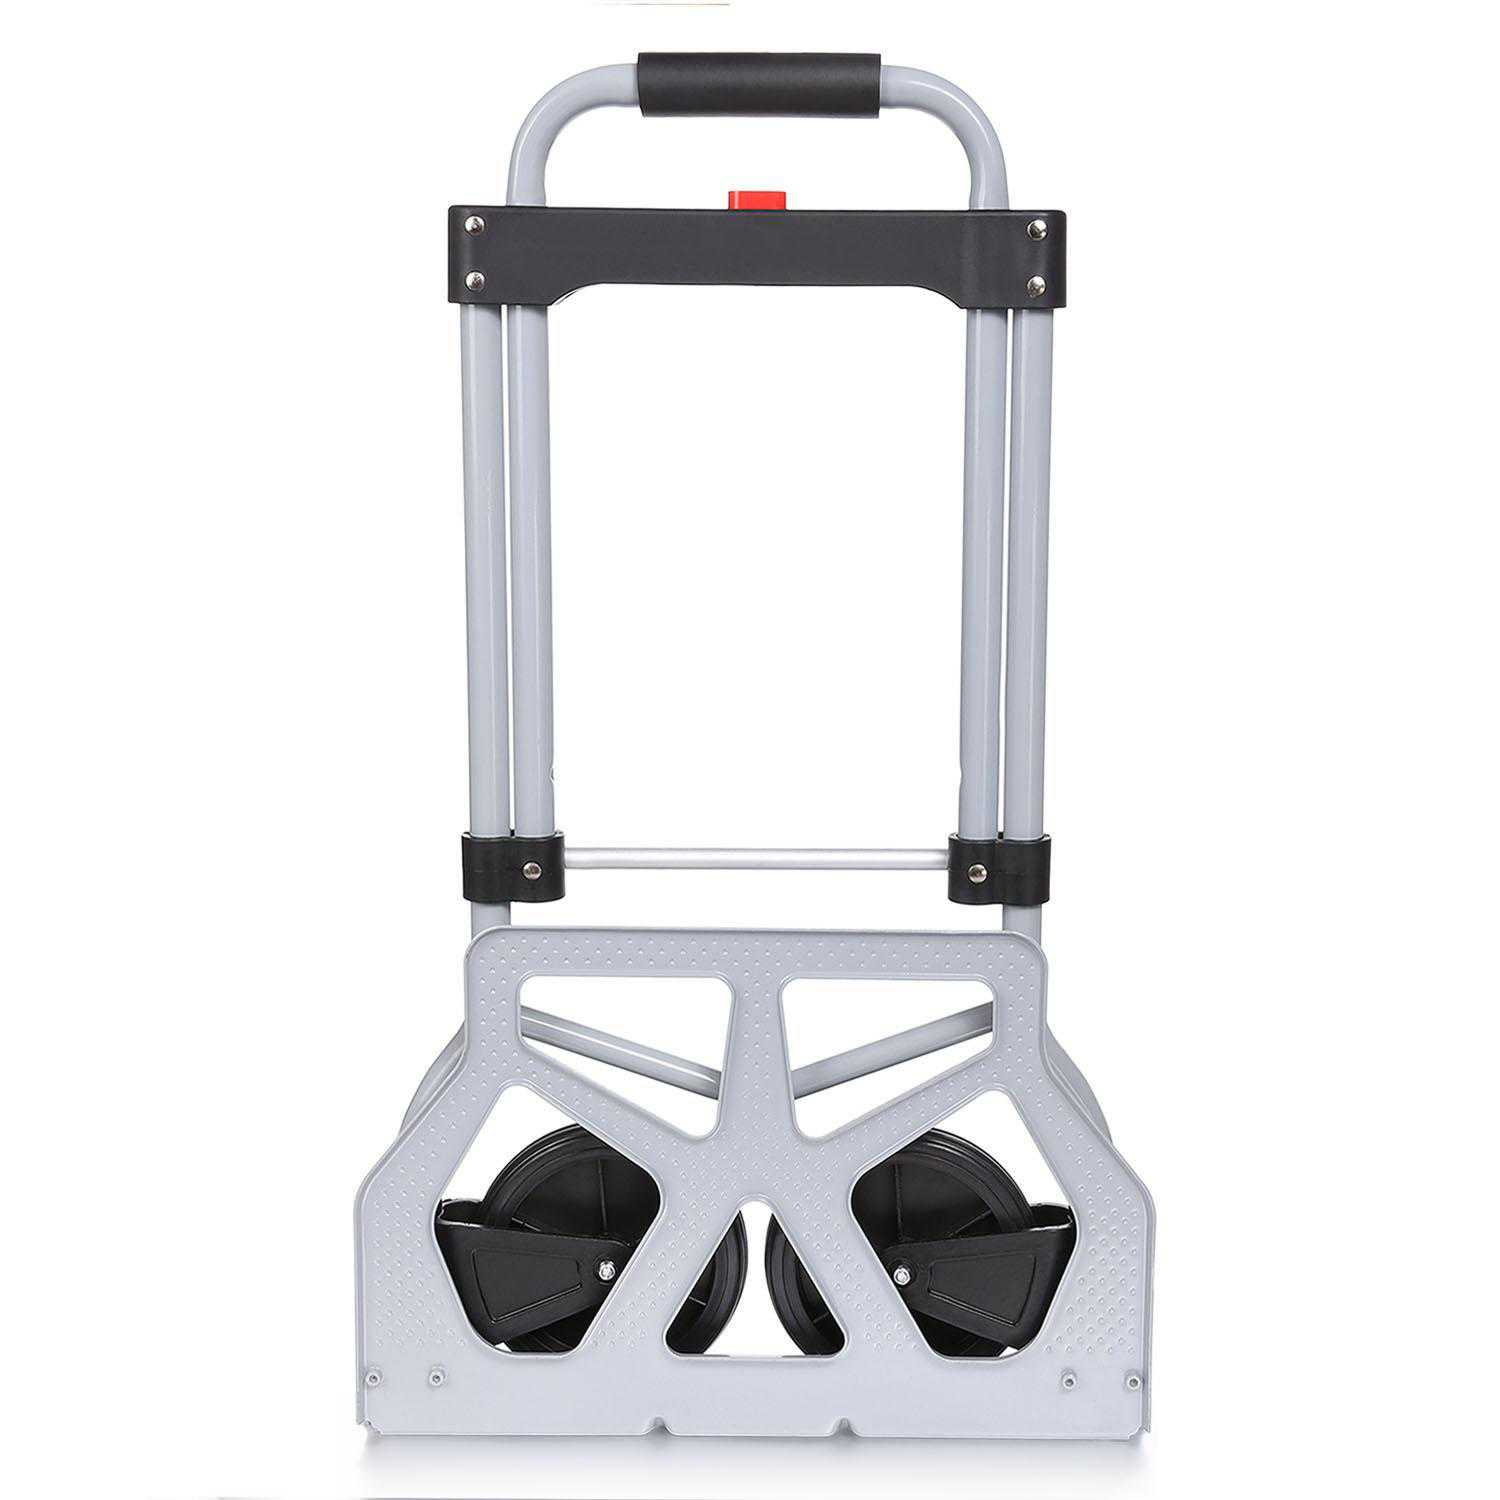 Portable Folding Hand Truck Dolly Luggage Carts, Silver, 220 lbs Capacity, Industrial/Travel/Shopping Aphe